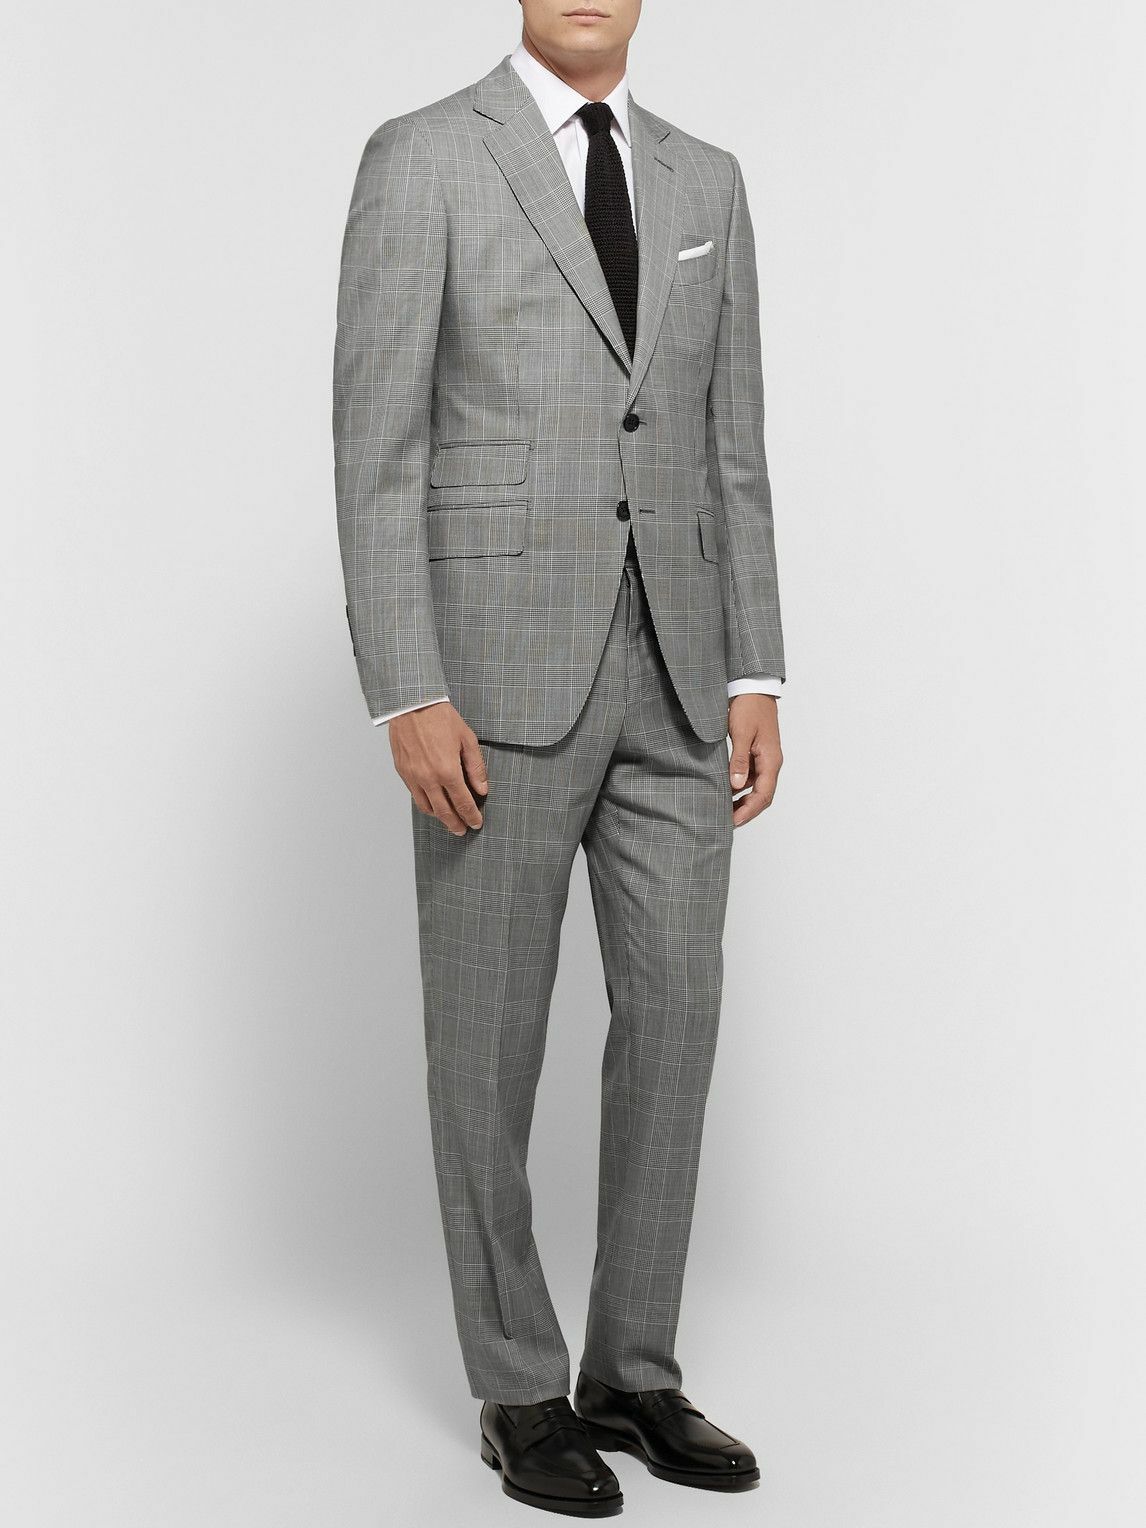 TOM FORD - O'Connor Slim-Fit Prince of Wales Checked Wool Suit Jacket -  Gray TOM FORD